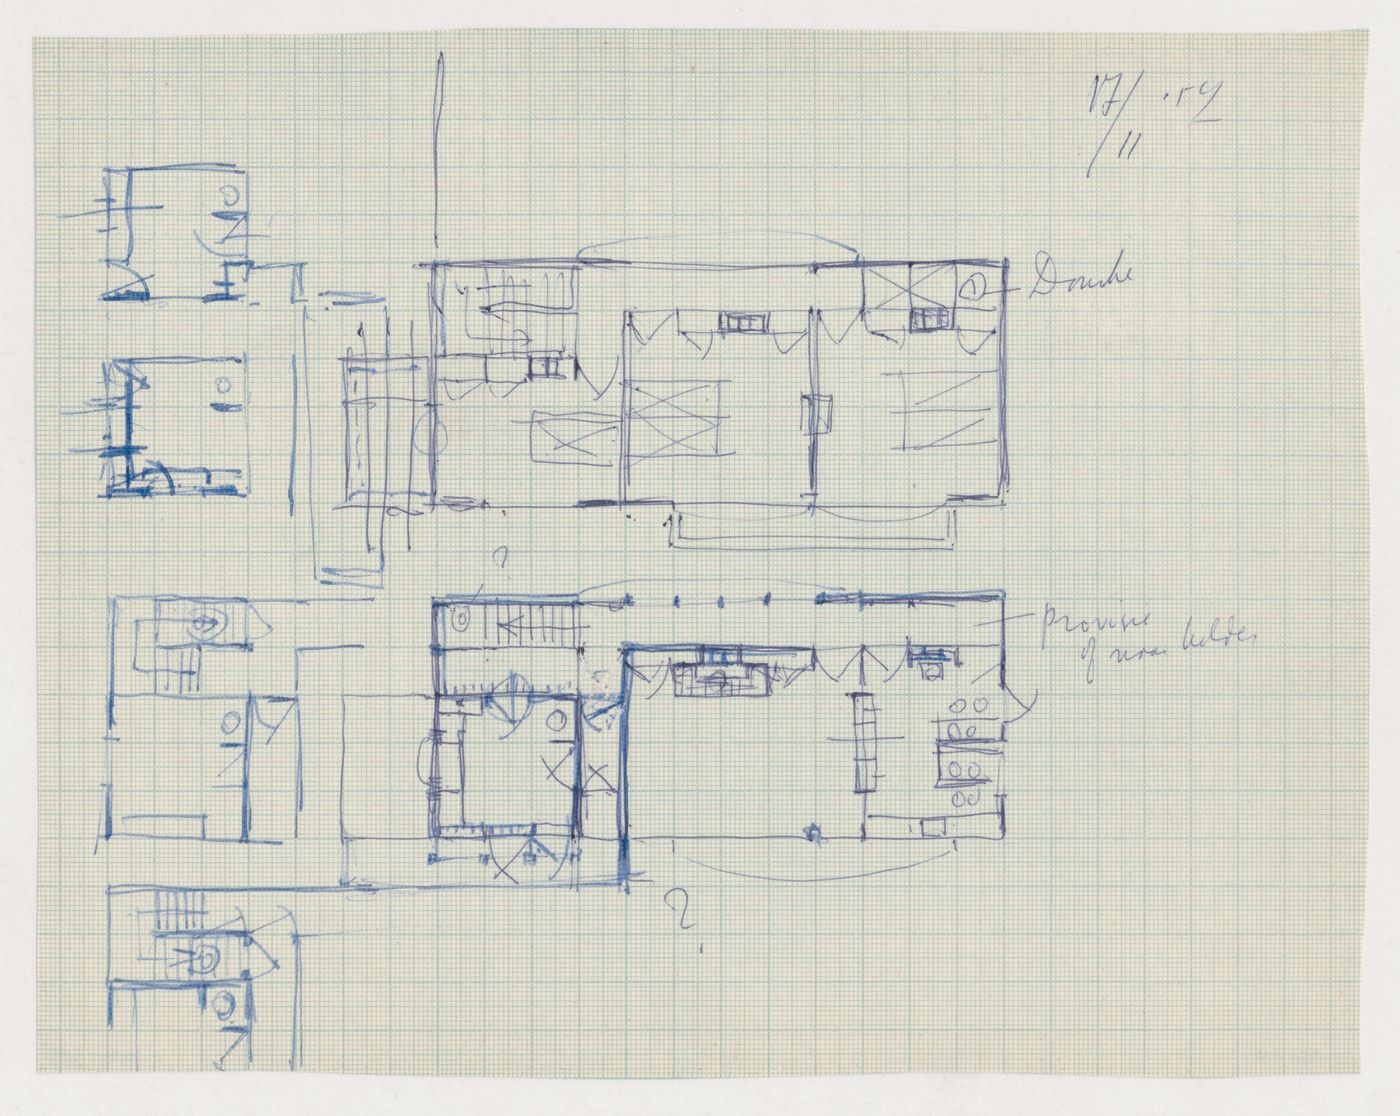 Sketch ground and first floor plans and sketch plans, possibly for De Hogue Veluwe park-keeper's house, Otterloo, Netherlands